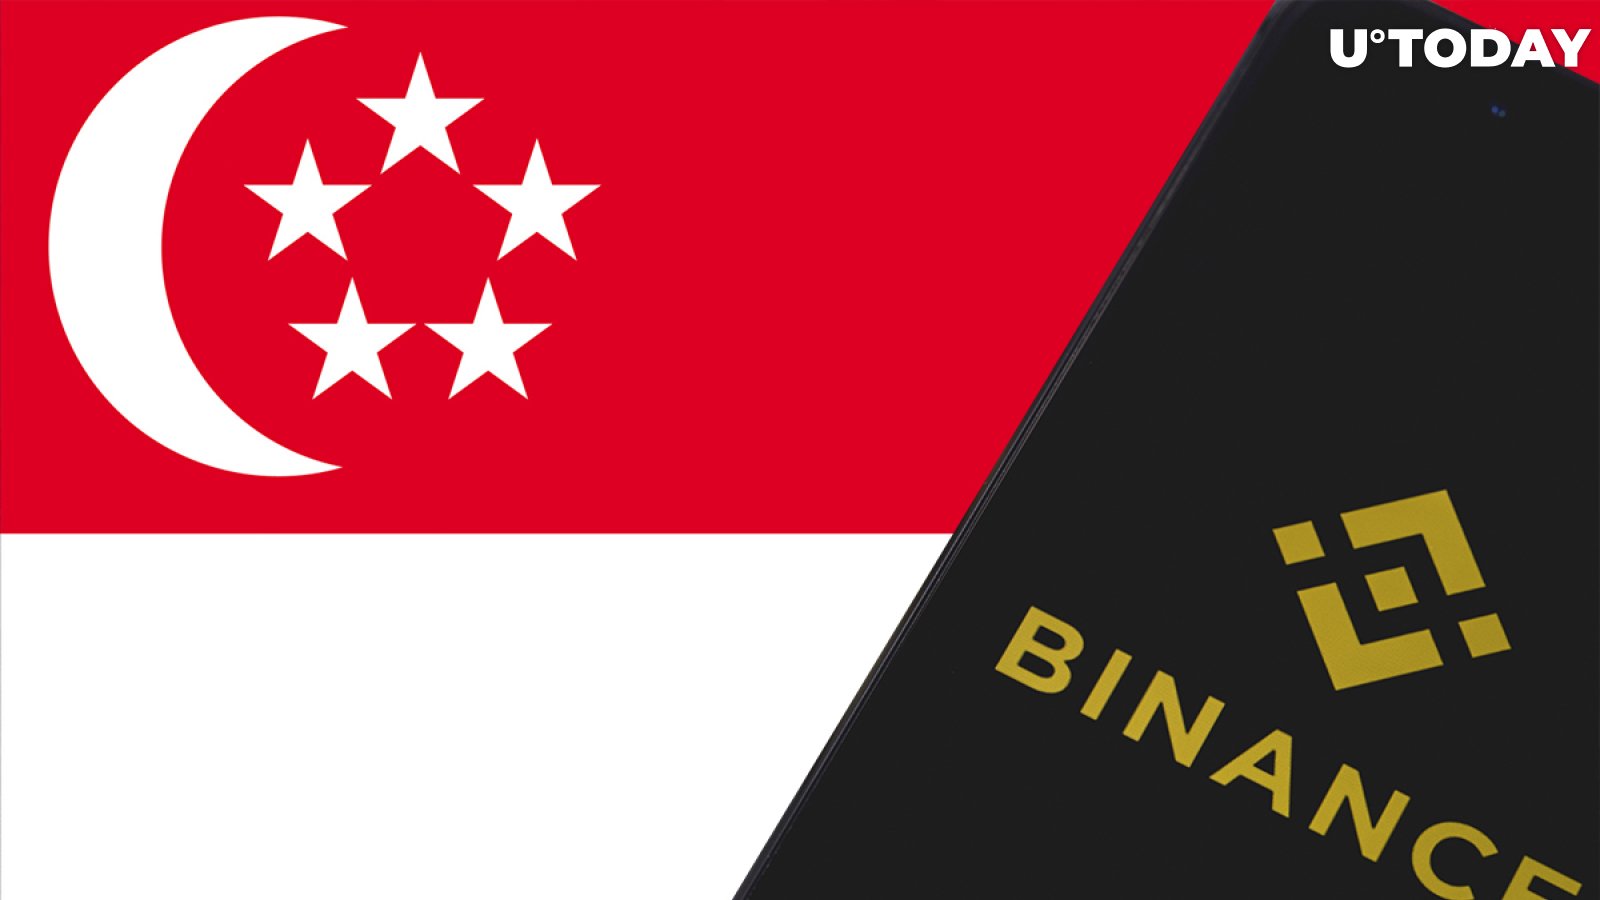 Users from Singapore Are No Longer Able to Use Binance: Deposits and Spot Trading Restricted